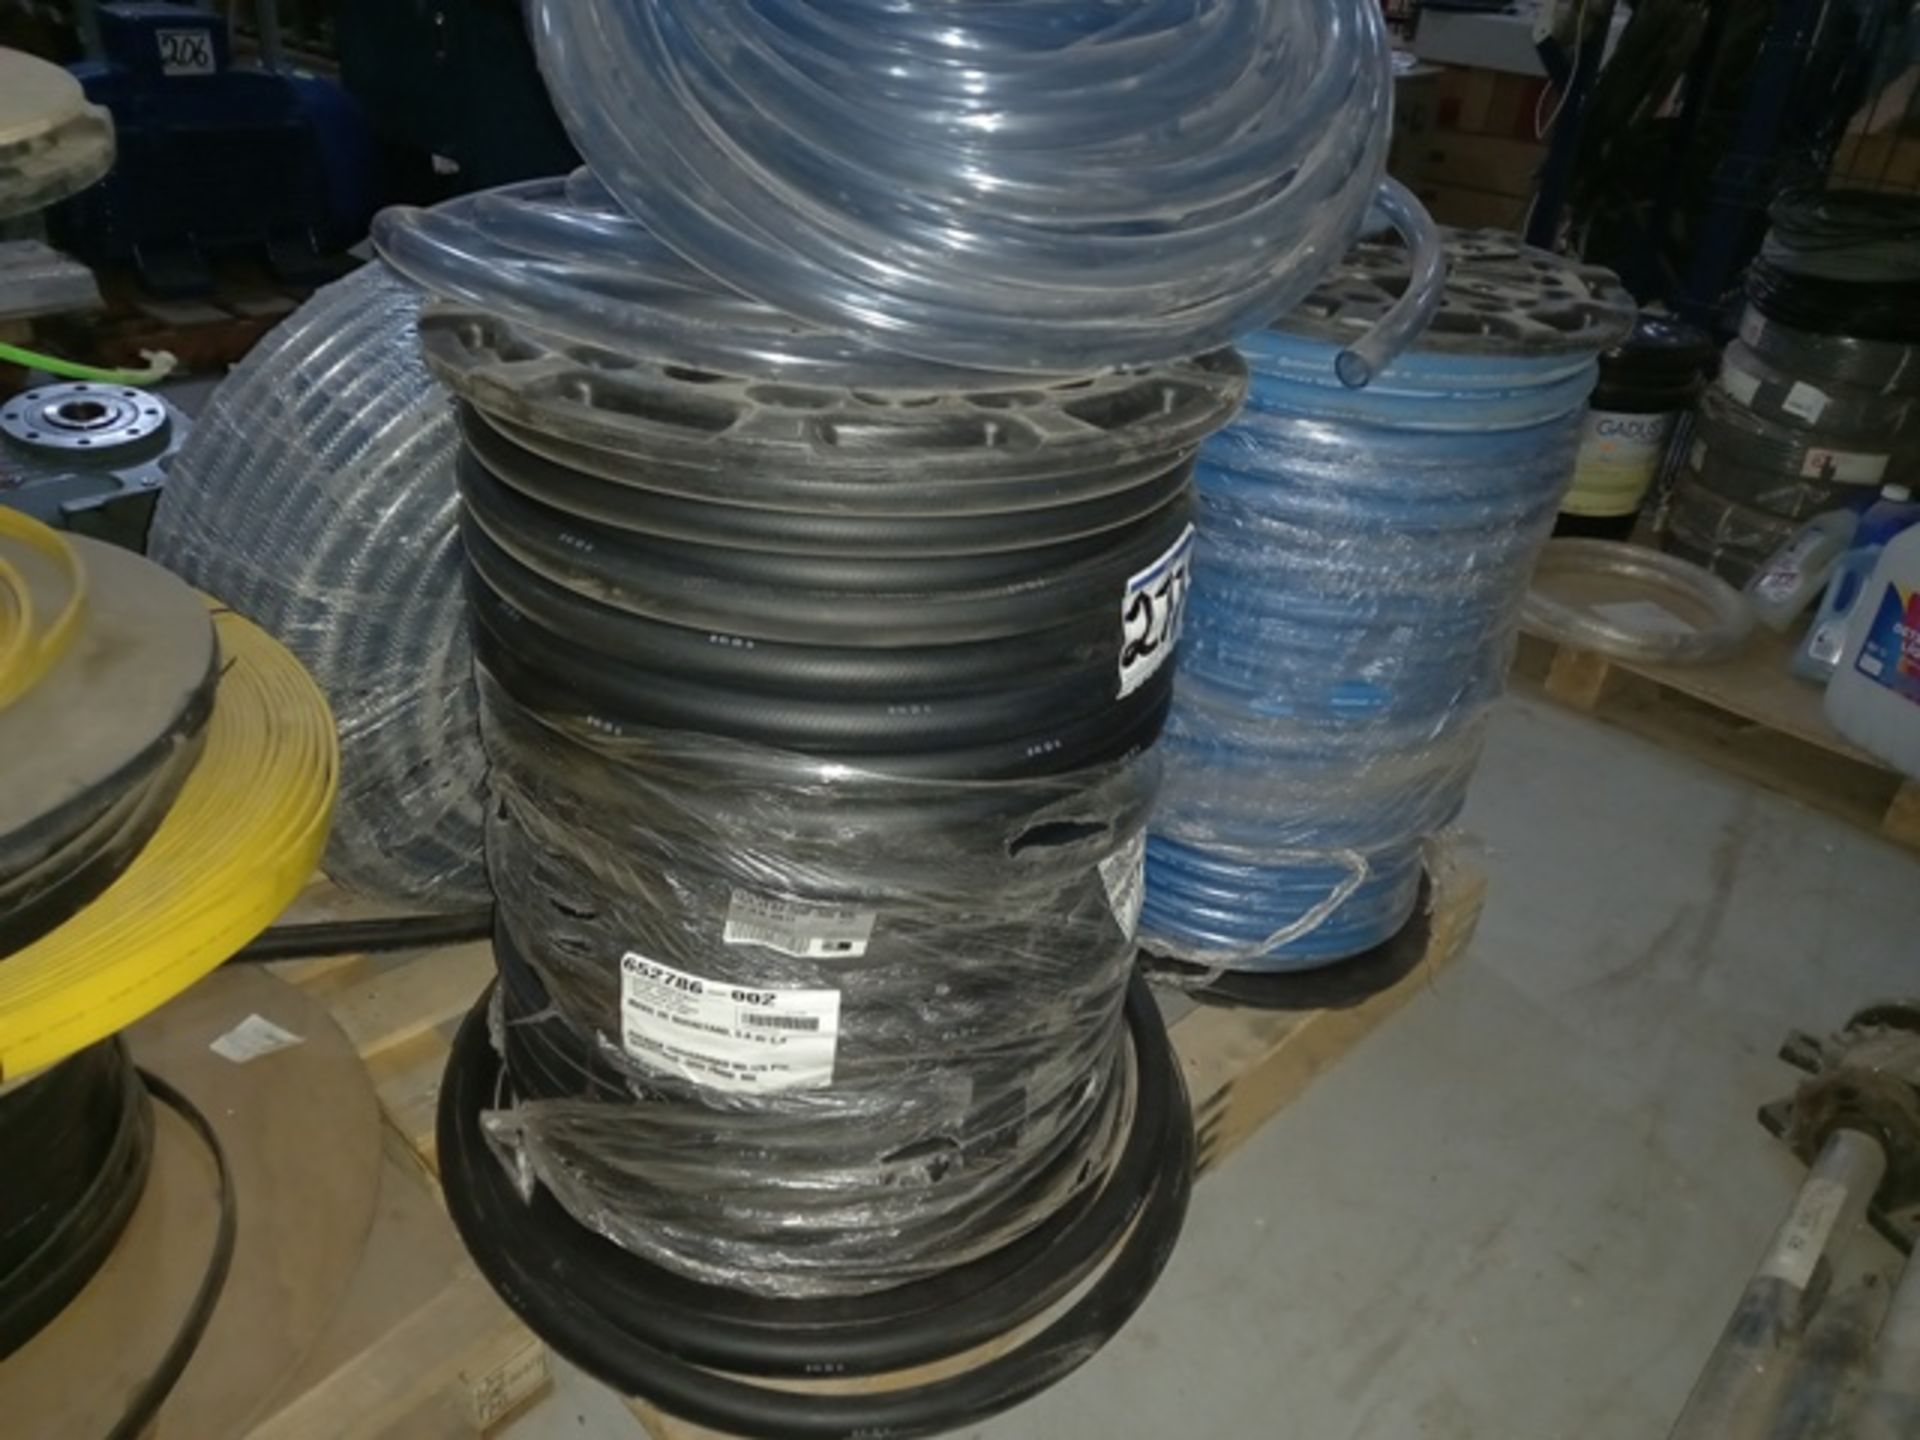 Lot of Plastic Hose Different Sizes - Image 7 of 8